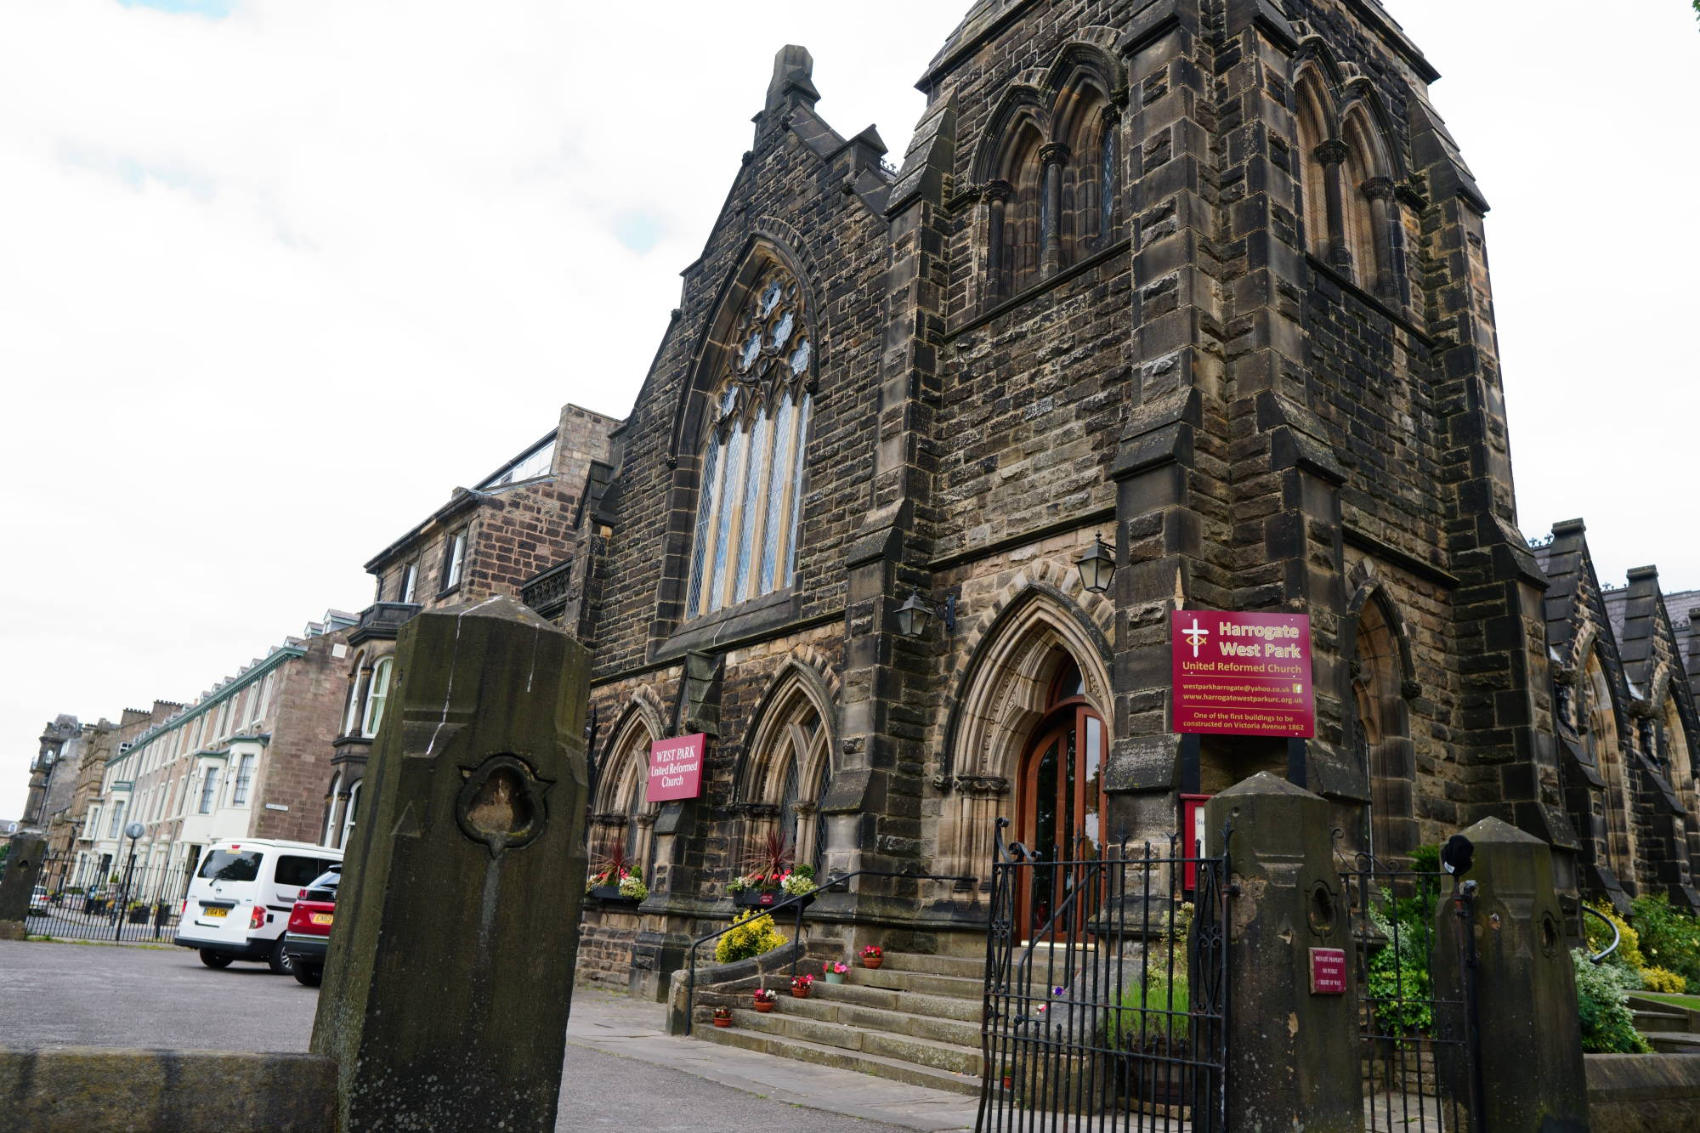 Plans to convert the West Park United Reformed Church into a flexible community space